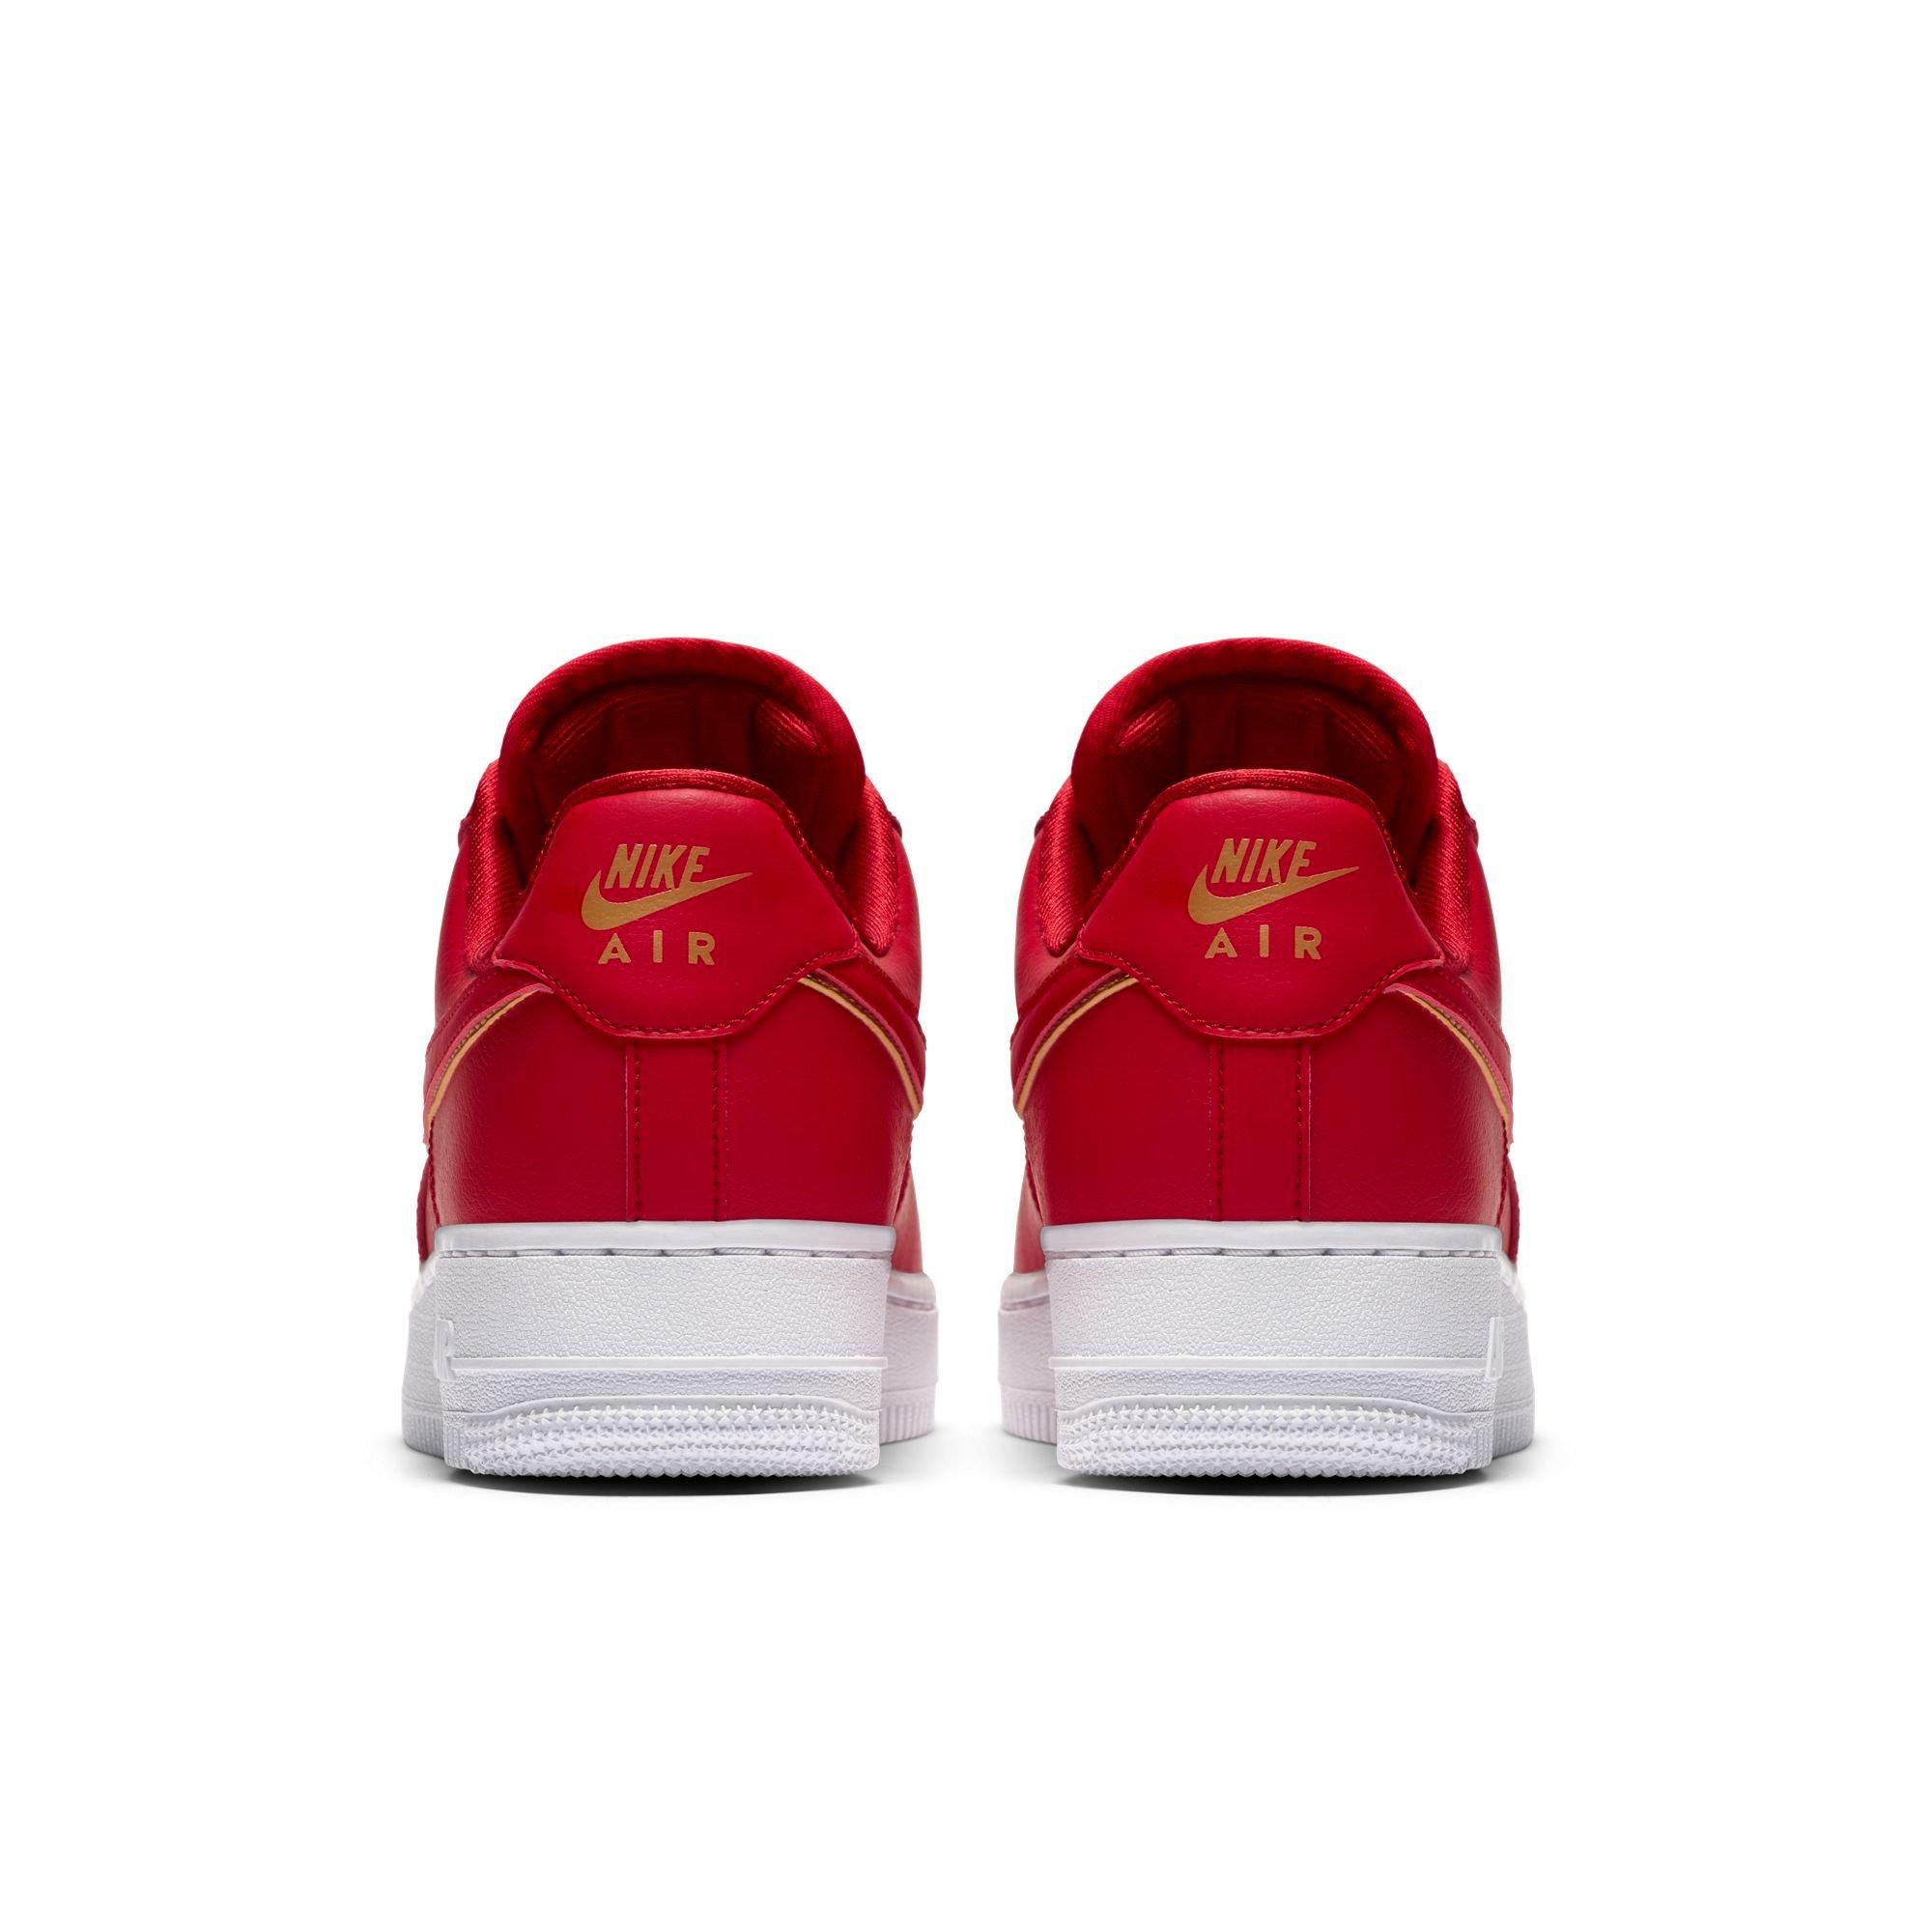 red and gold nike shoes